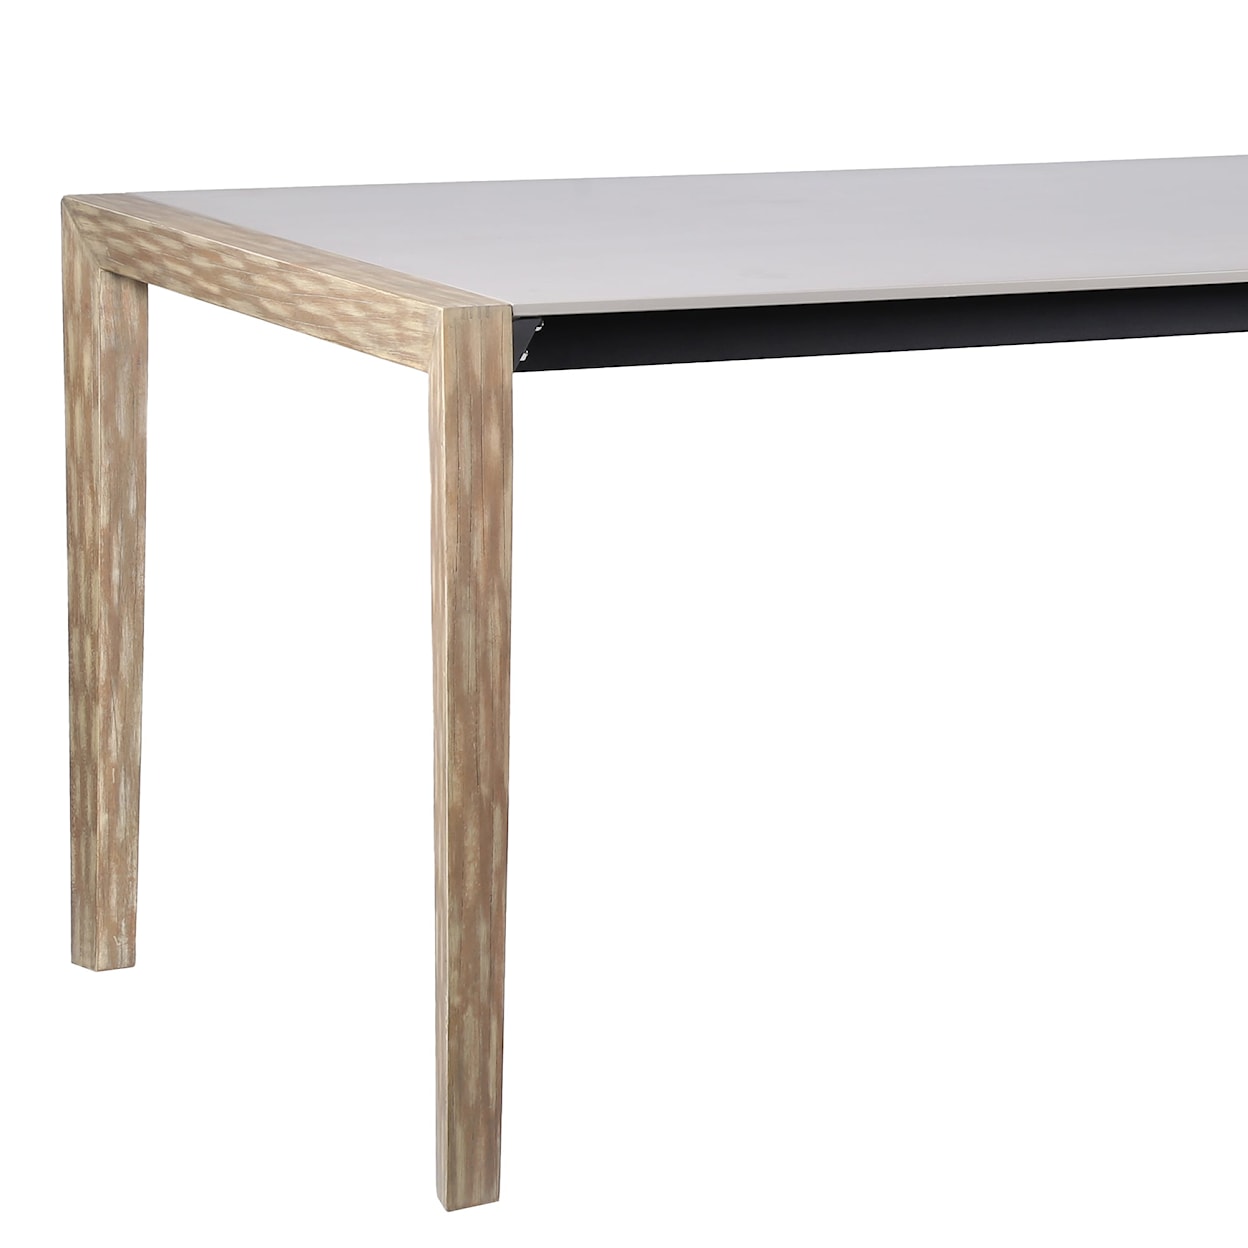 Armen Living Fineline Outdoor Dining Table